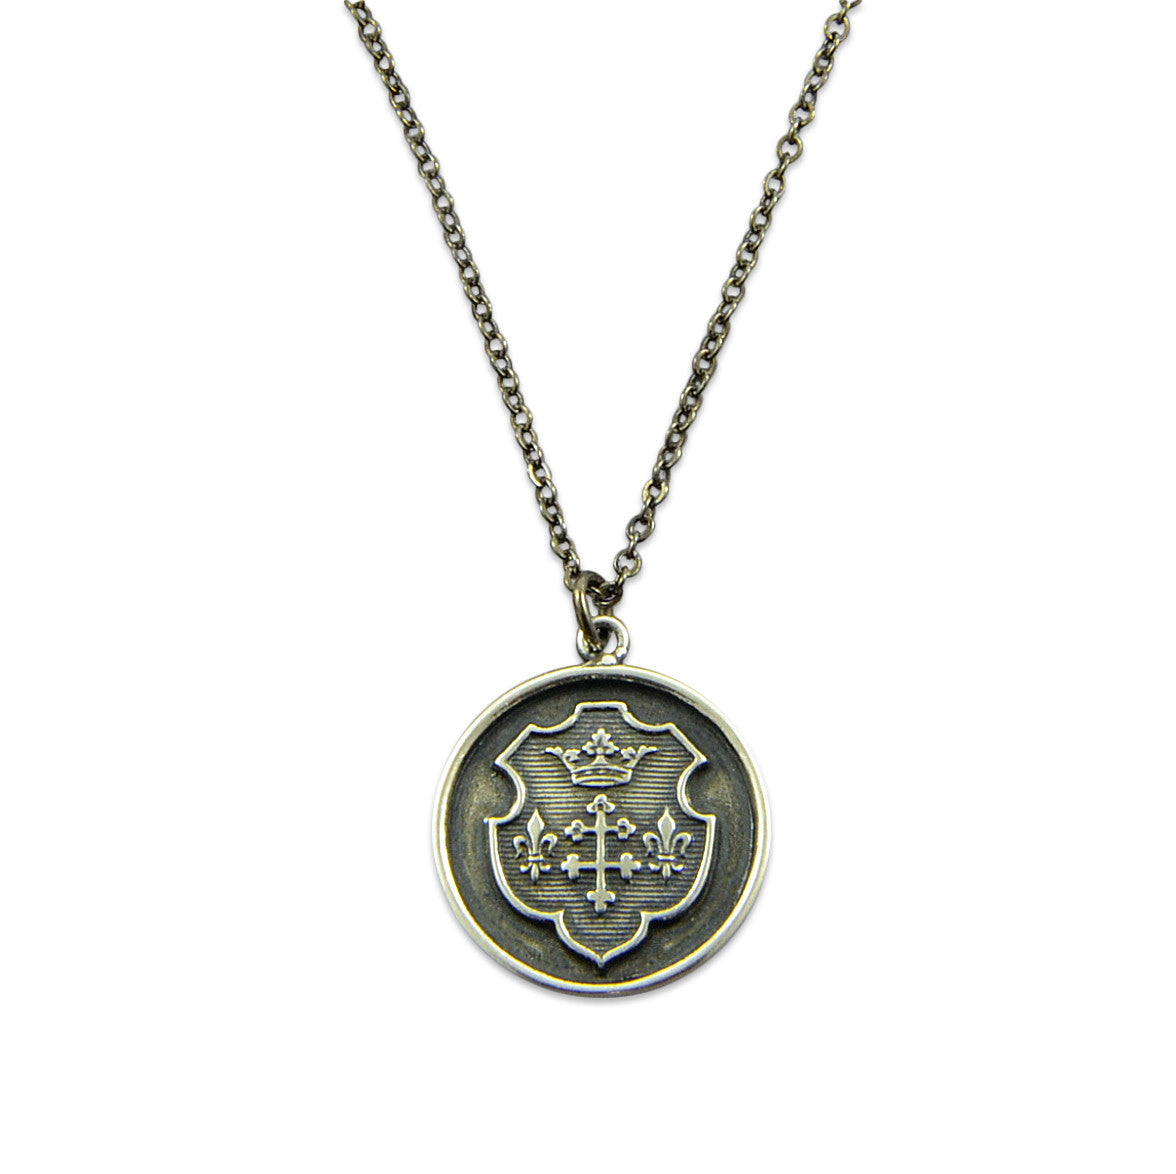 Coat of Arms Wax Seal Necklace - Gwen Delicious Jewelry Designs